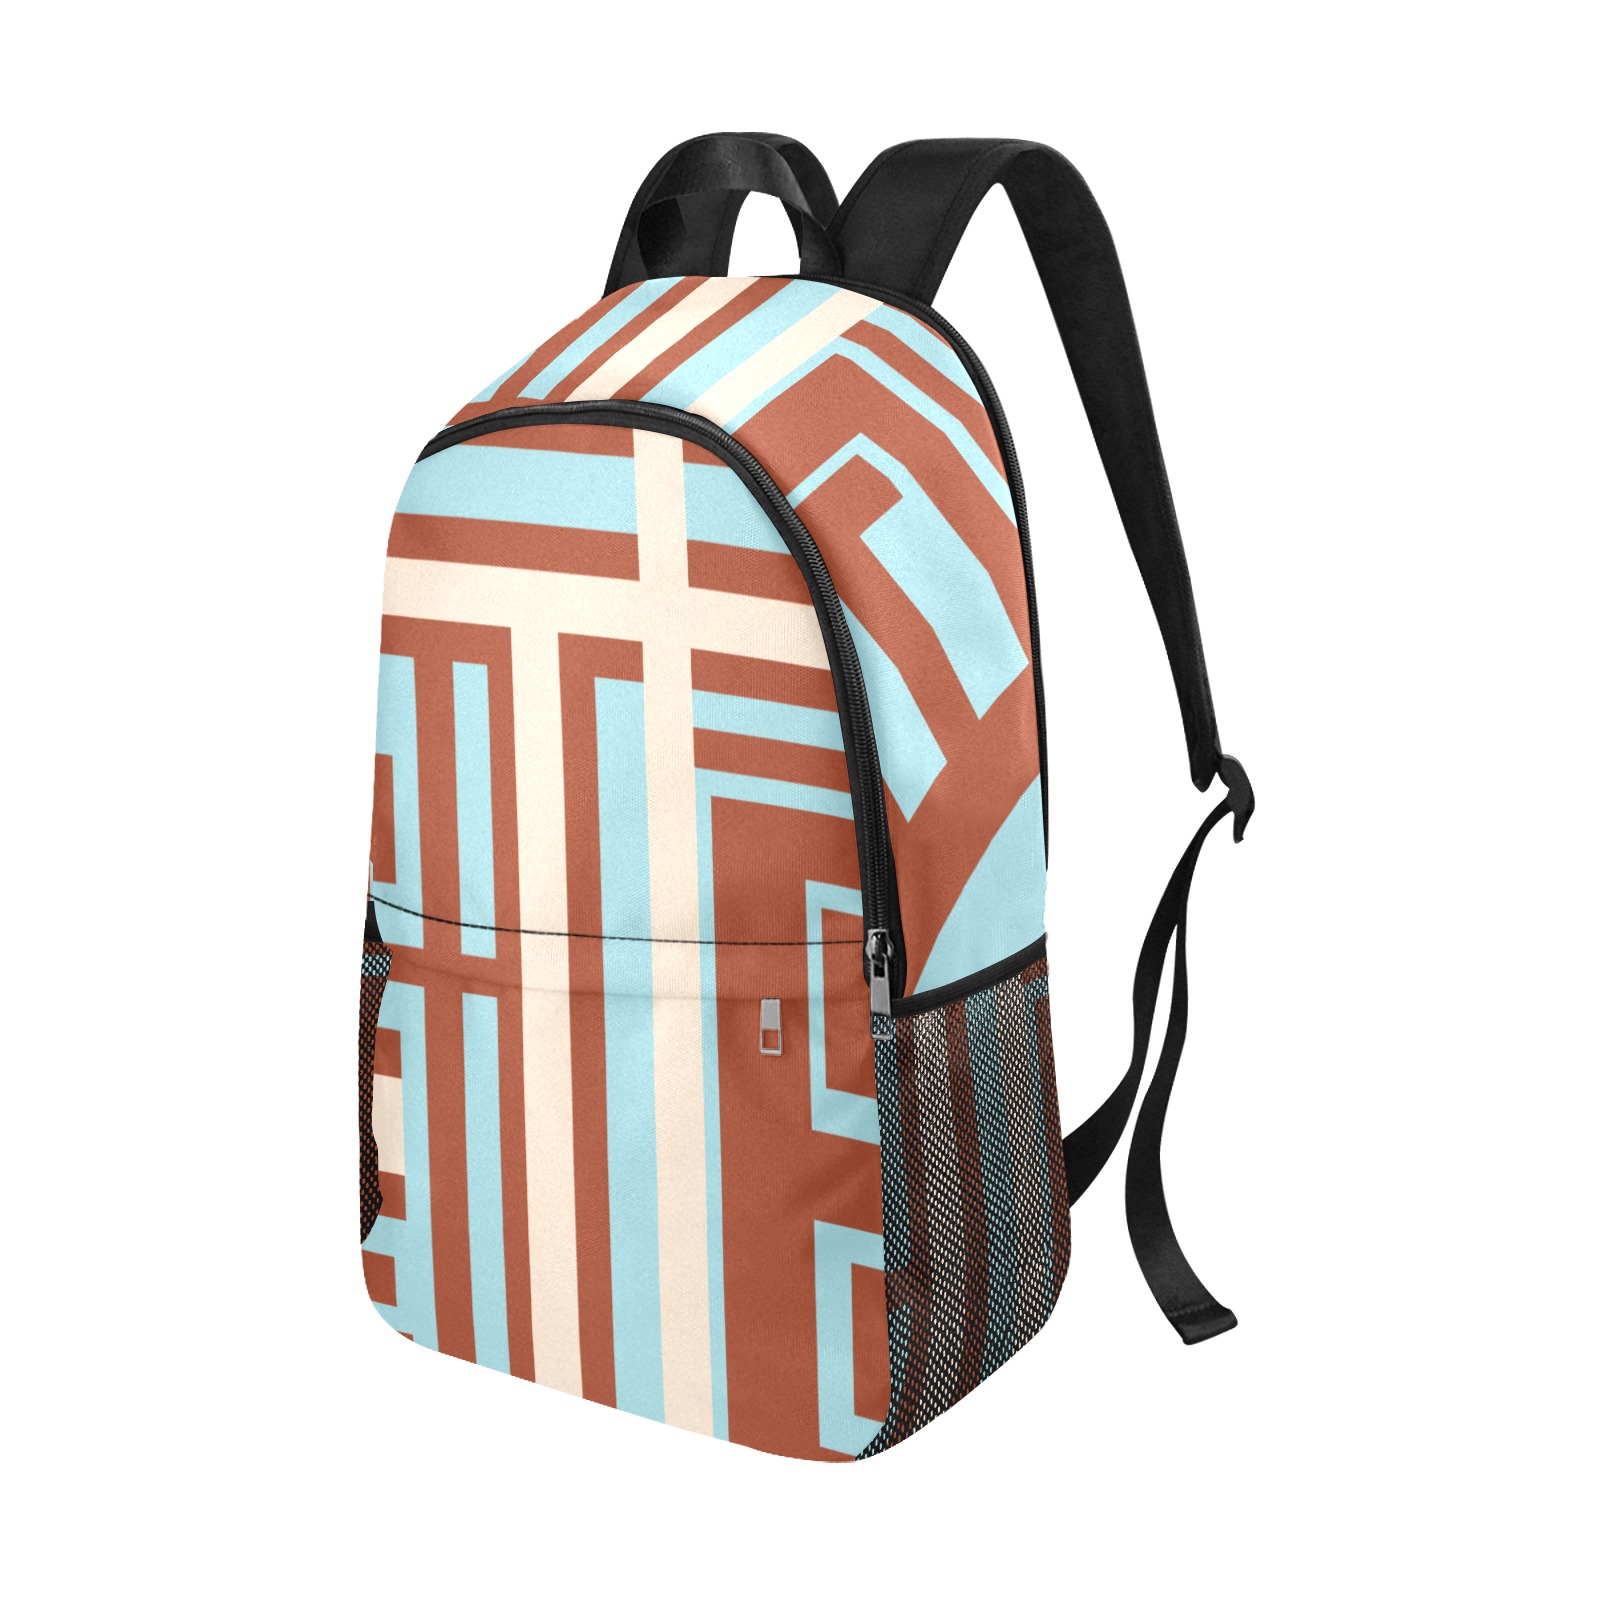 Model 1 Fabric Backpack with Side Mesh Pockets (Model 1659)